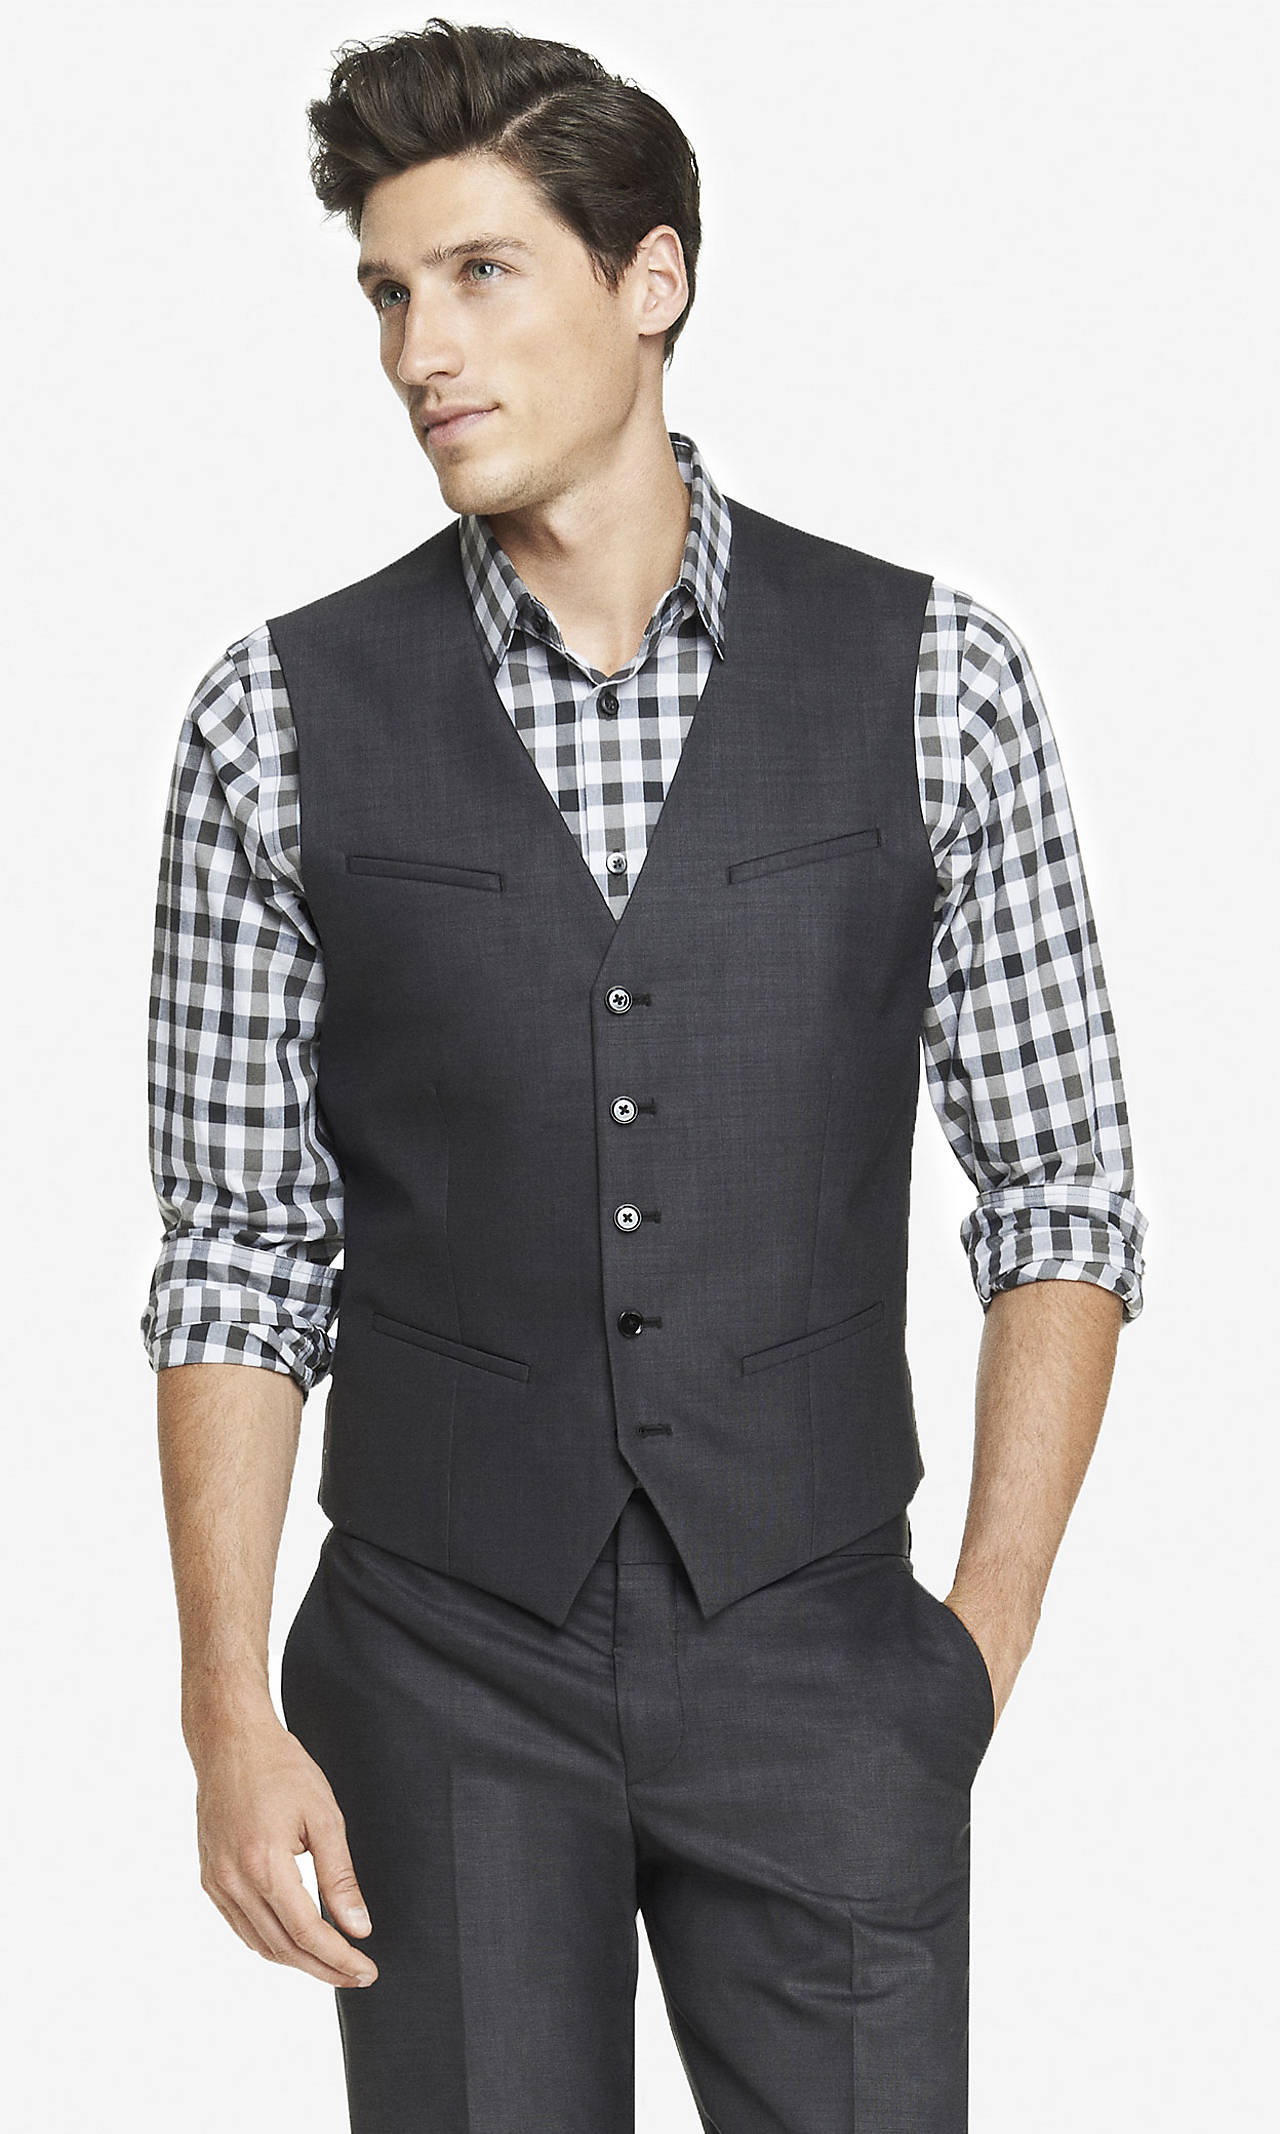 Vest + Tie + Jeans? Yay or nay? | Styleforum